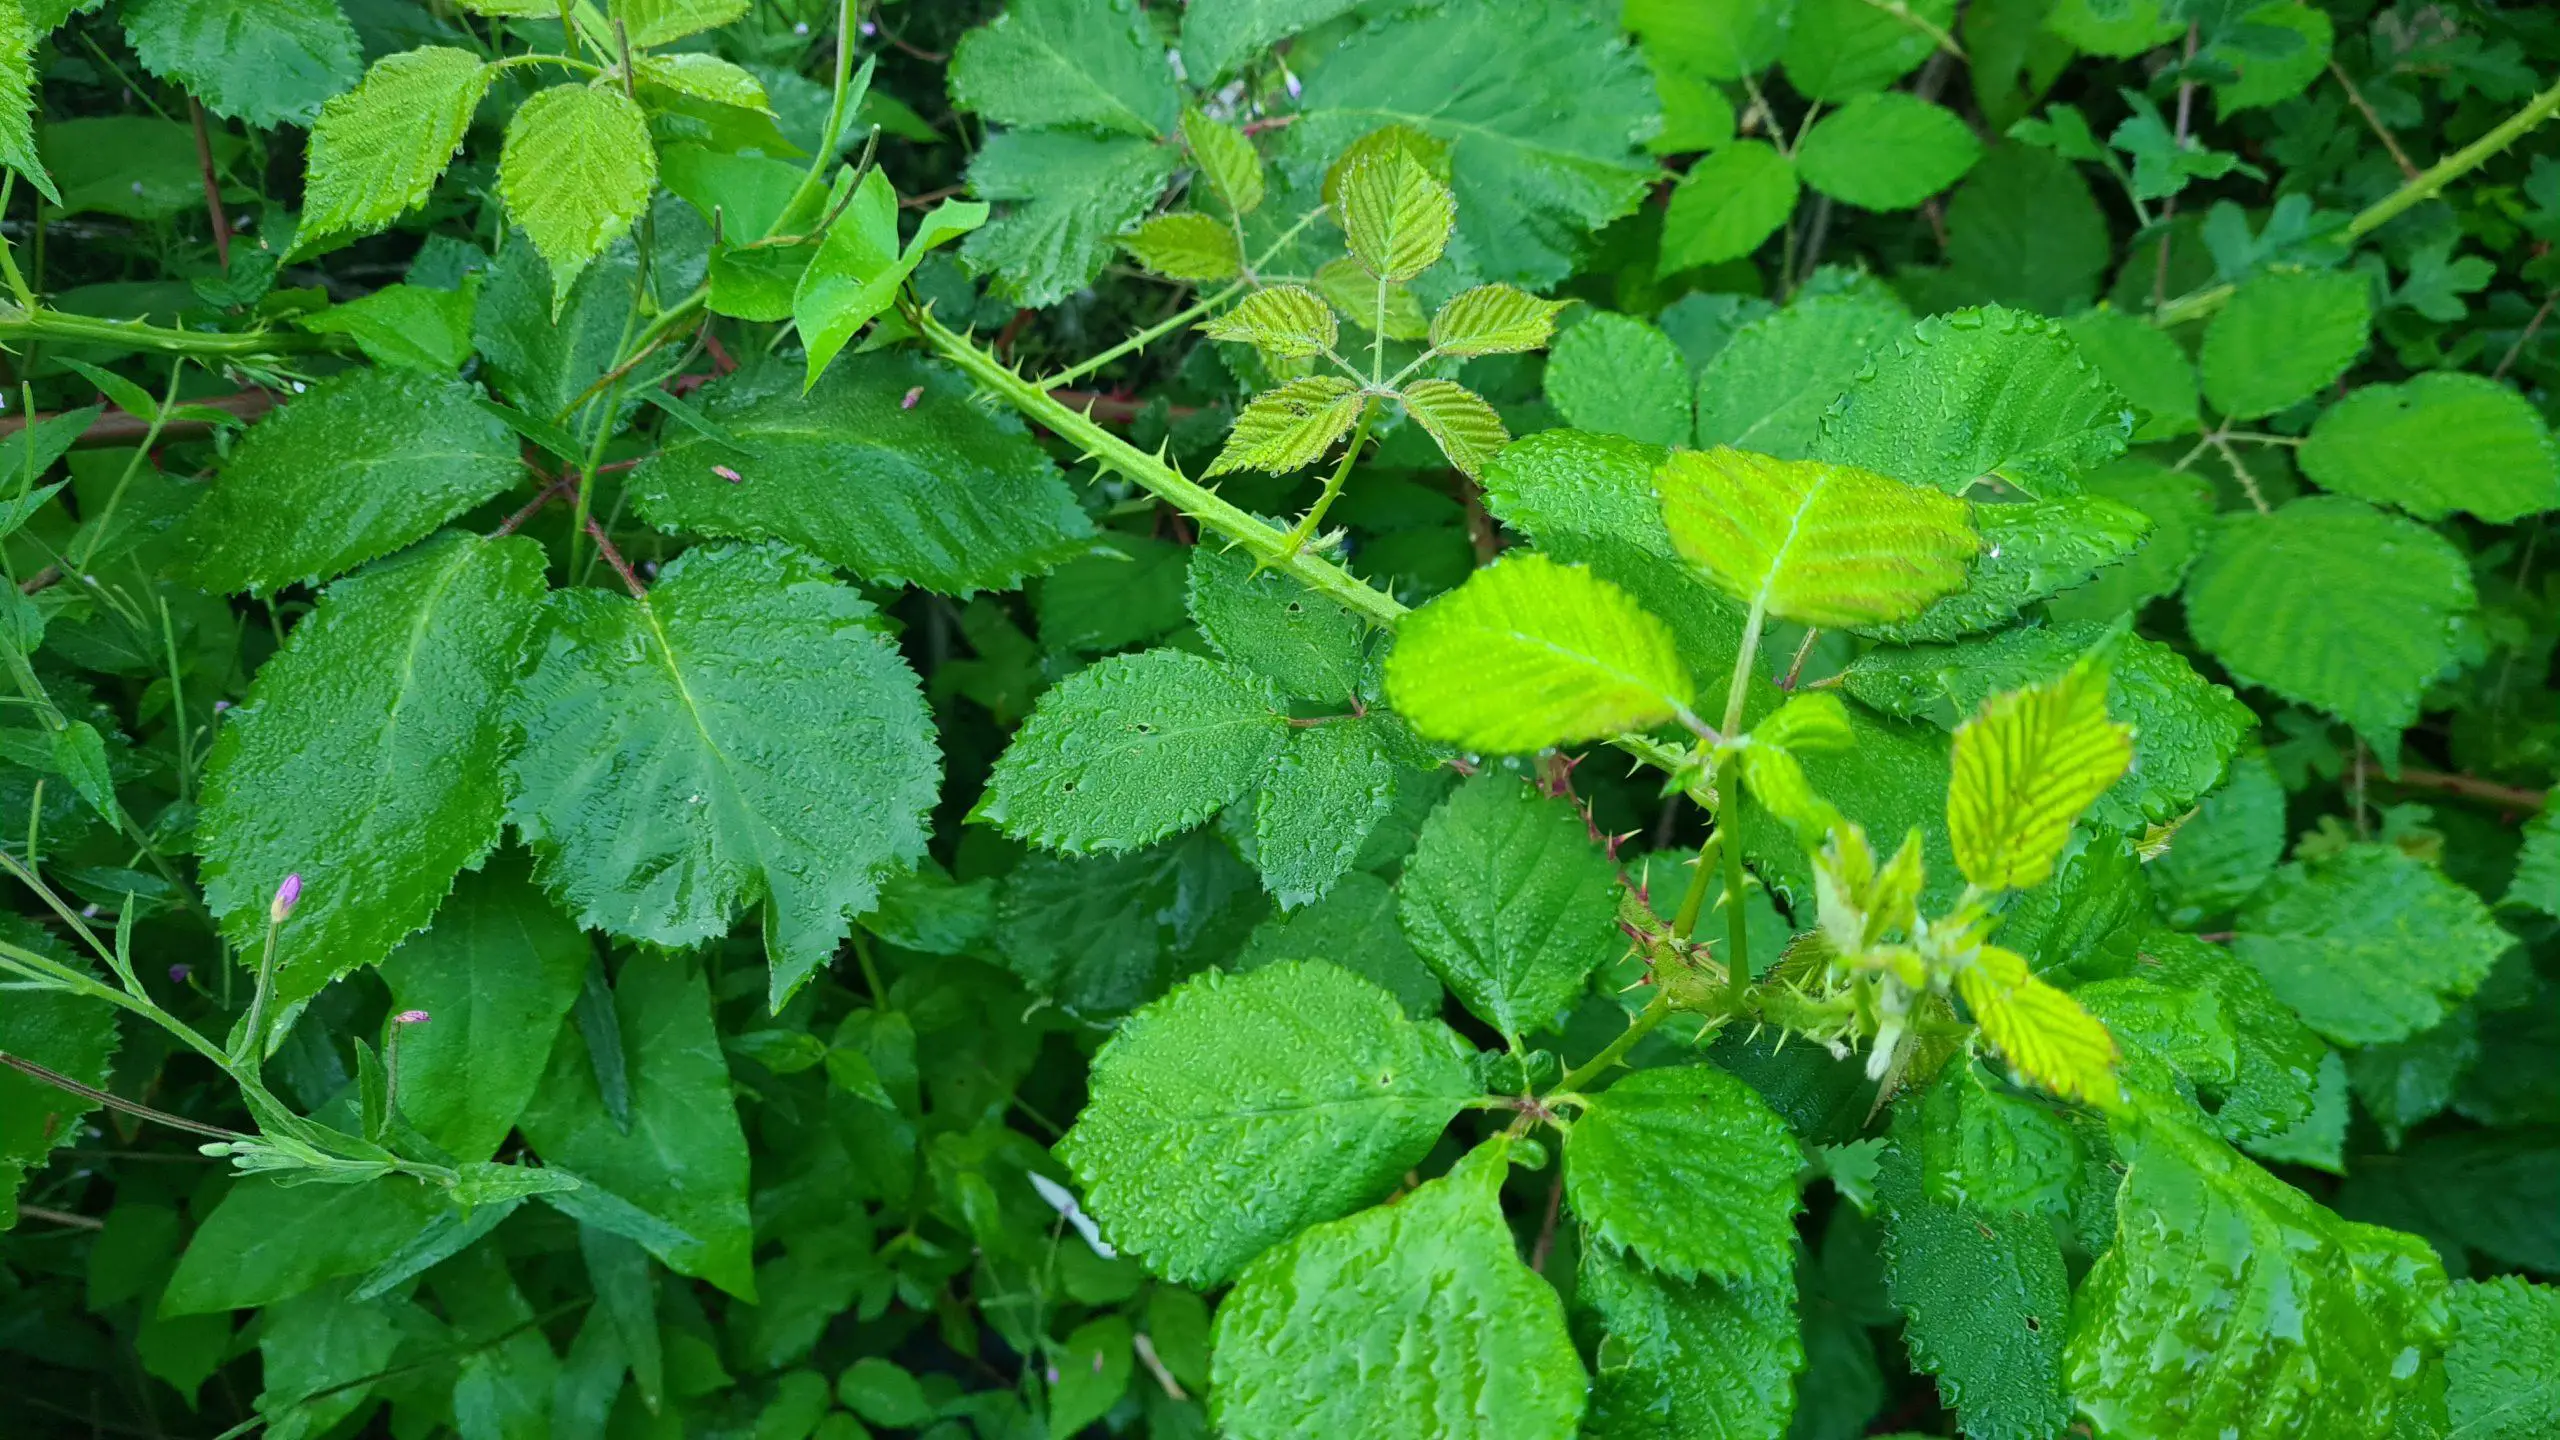 Brambles consuming an area with their leaf coverage scaled